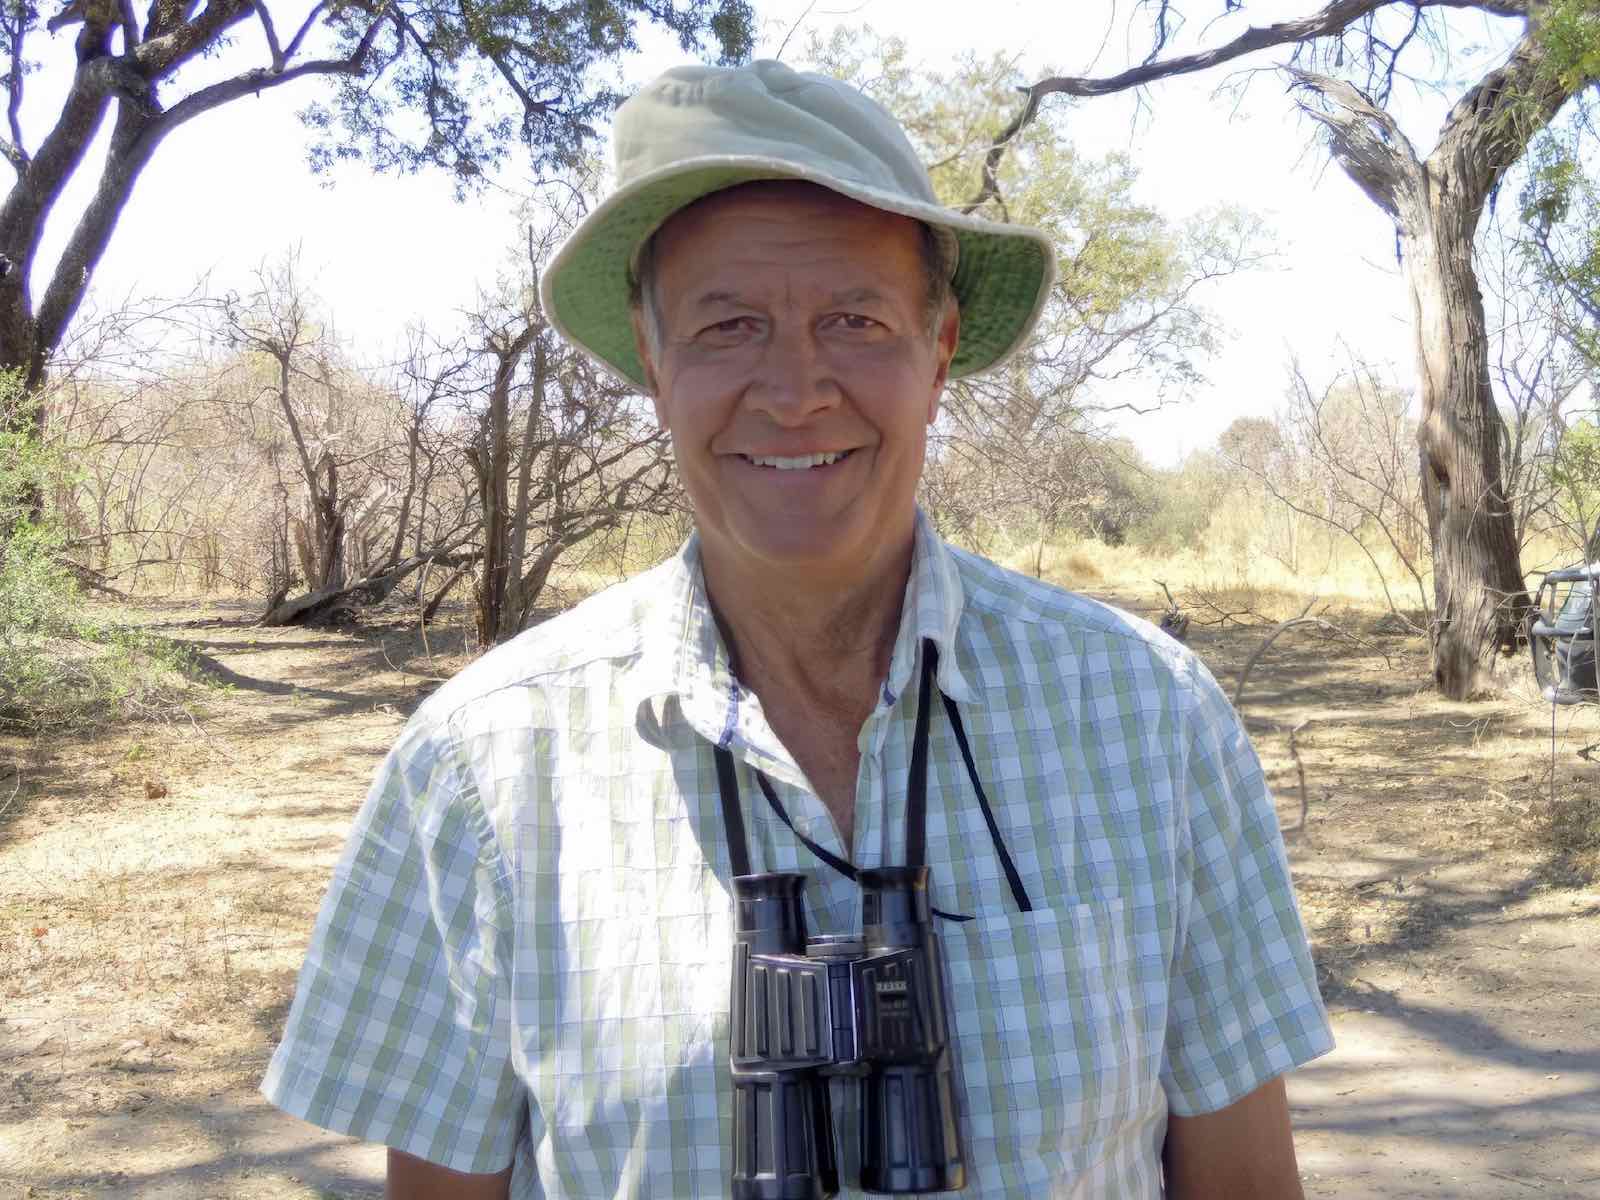 Dave Ward wearing a sunhat and with a pair of binoculars around his neck, smiling at the camera.